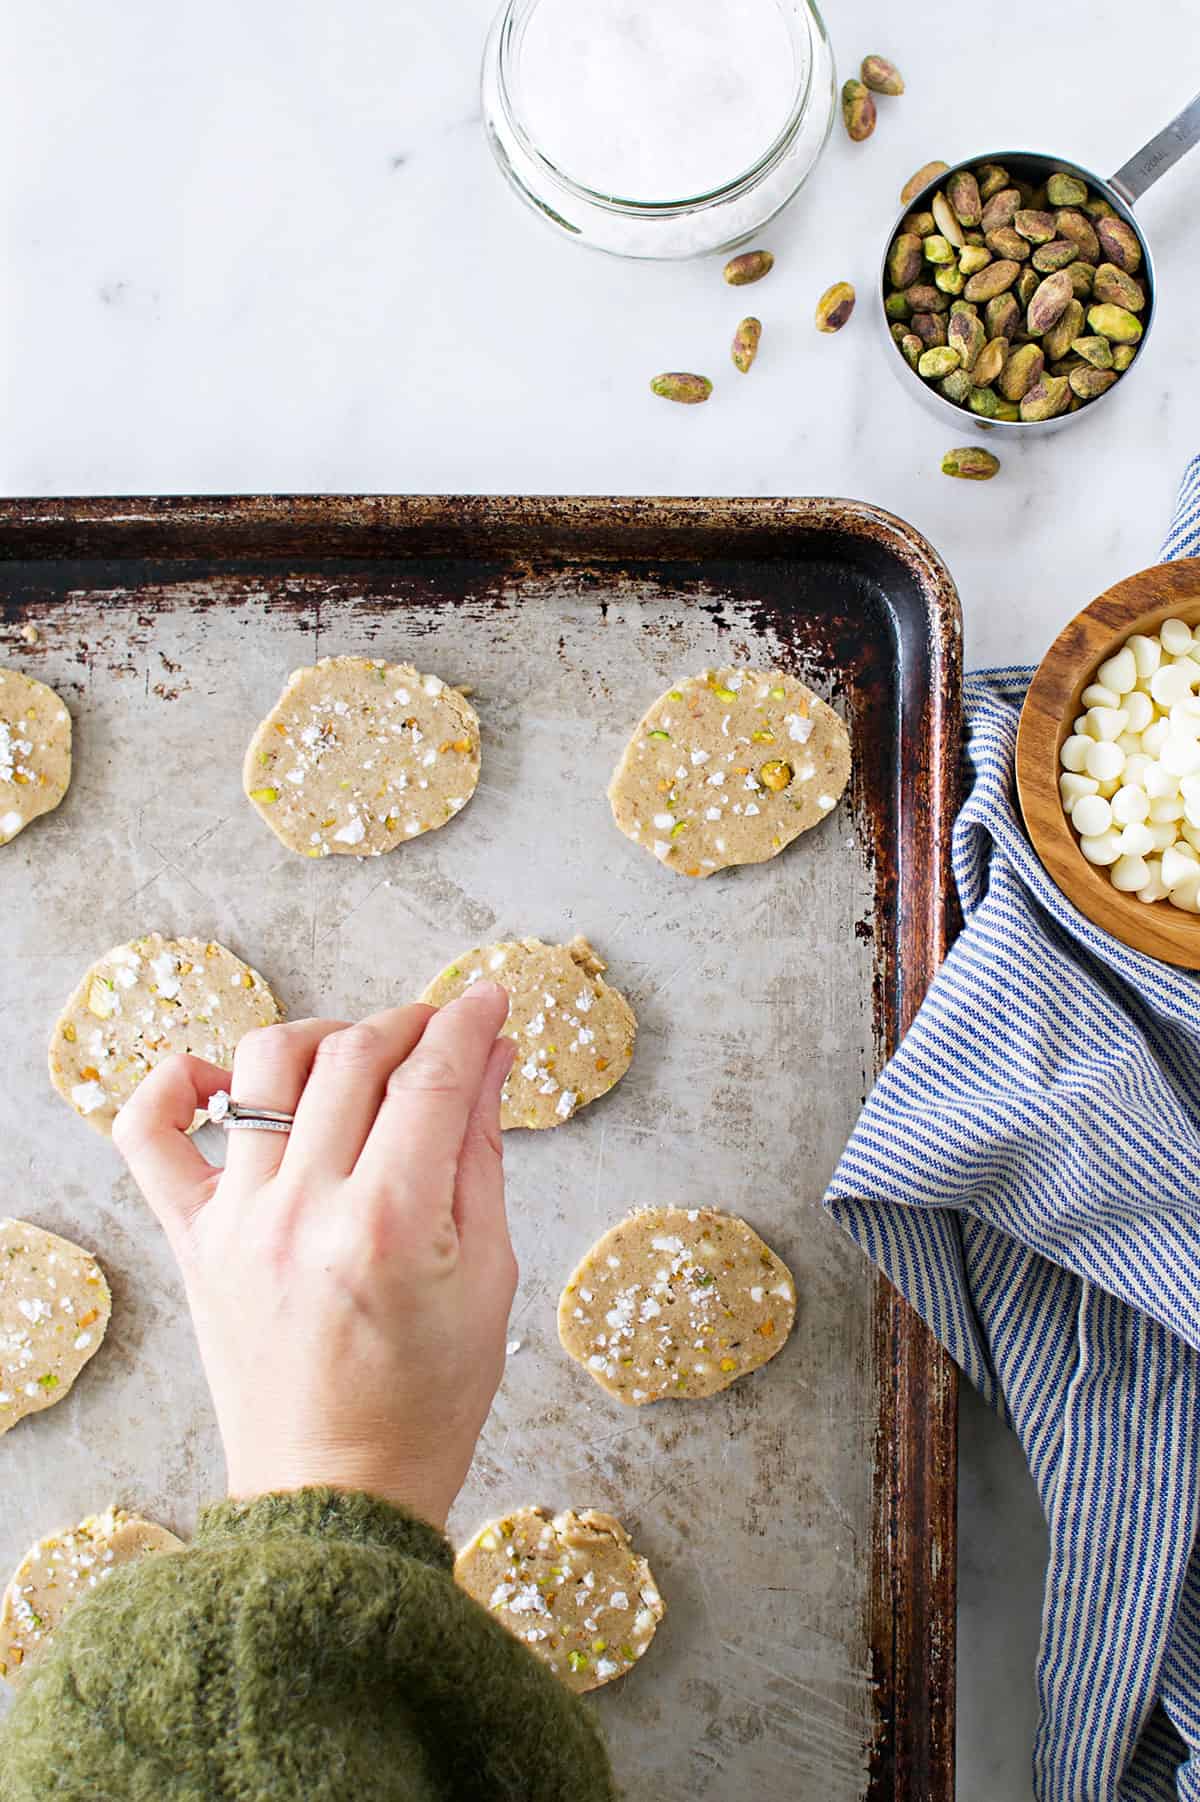 White Chocolate Pistachio Cookie Crisps recipe - egg-free, gluten-free white chocolate cookies studded with salty pistachios. Positively addictive! (via thepigandquill.com) #sweets #dessert #baking